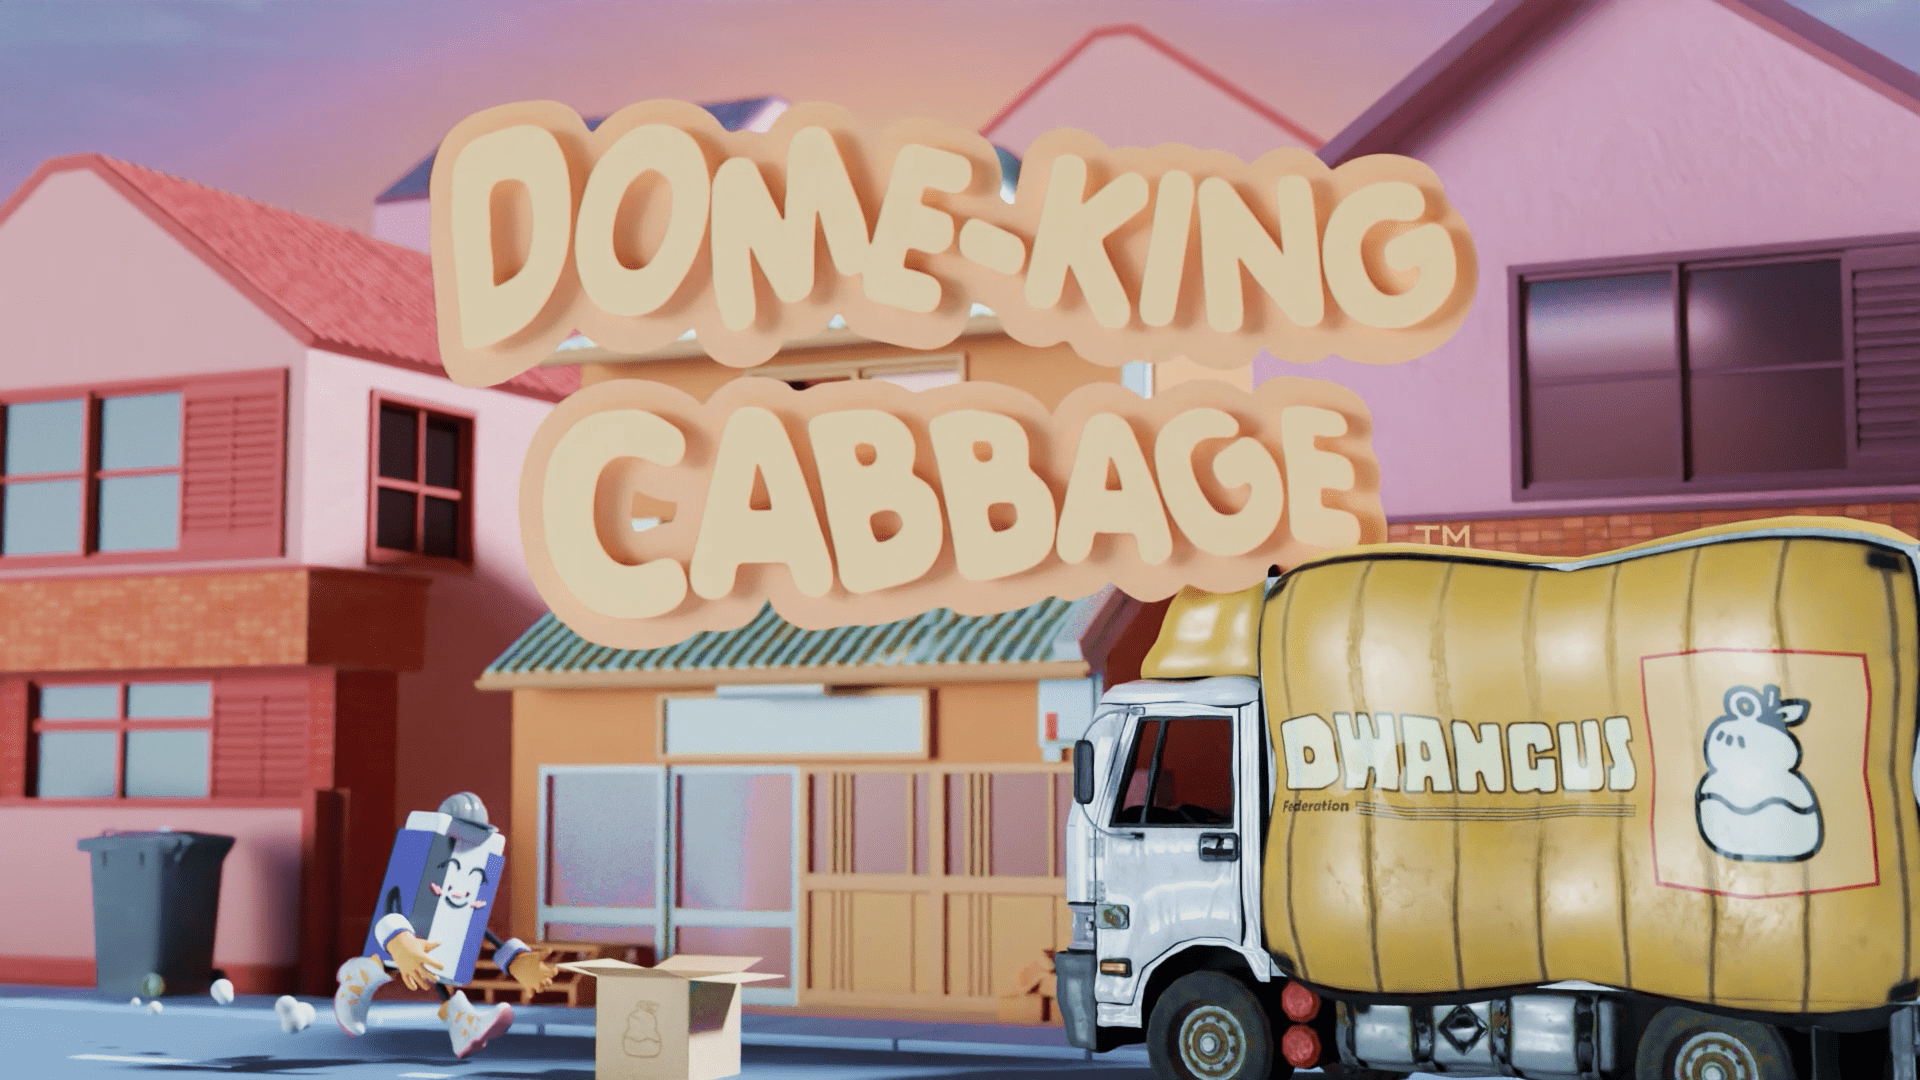 Dome-King Cabbage